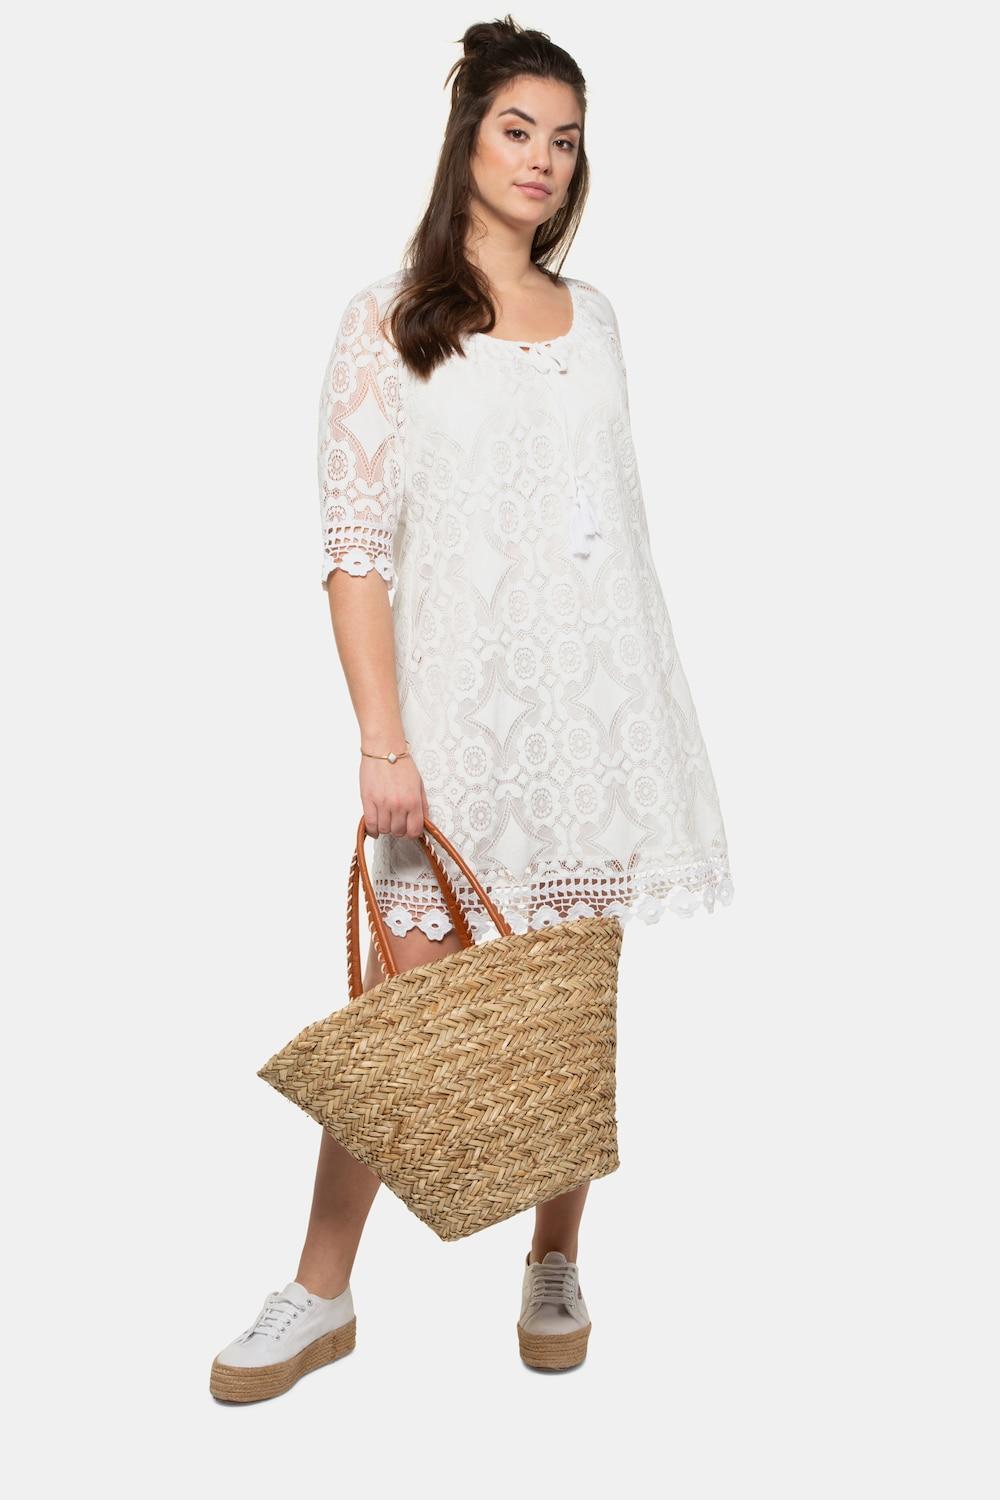 Alluring Lace Carmen Style Layer Dress